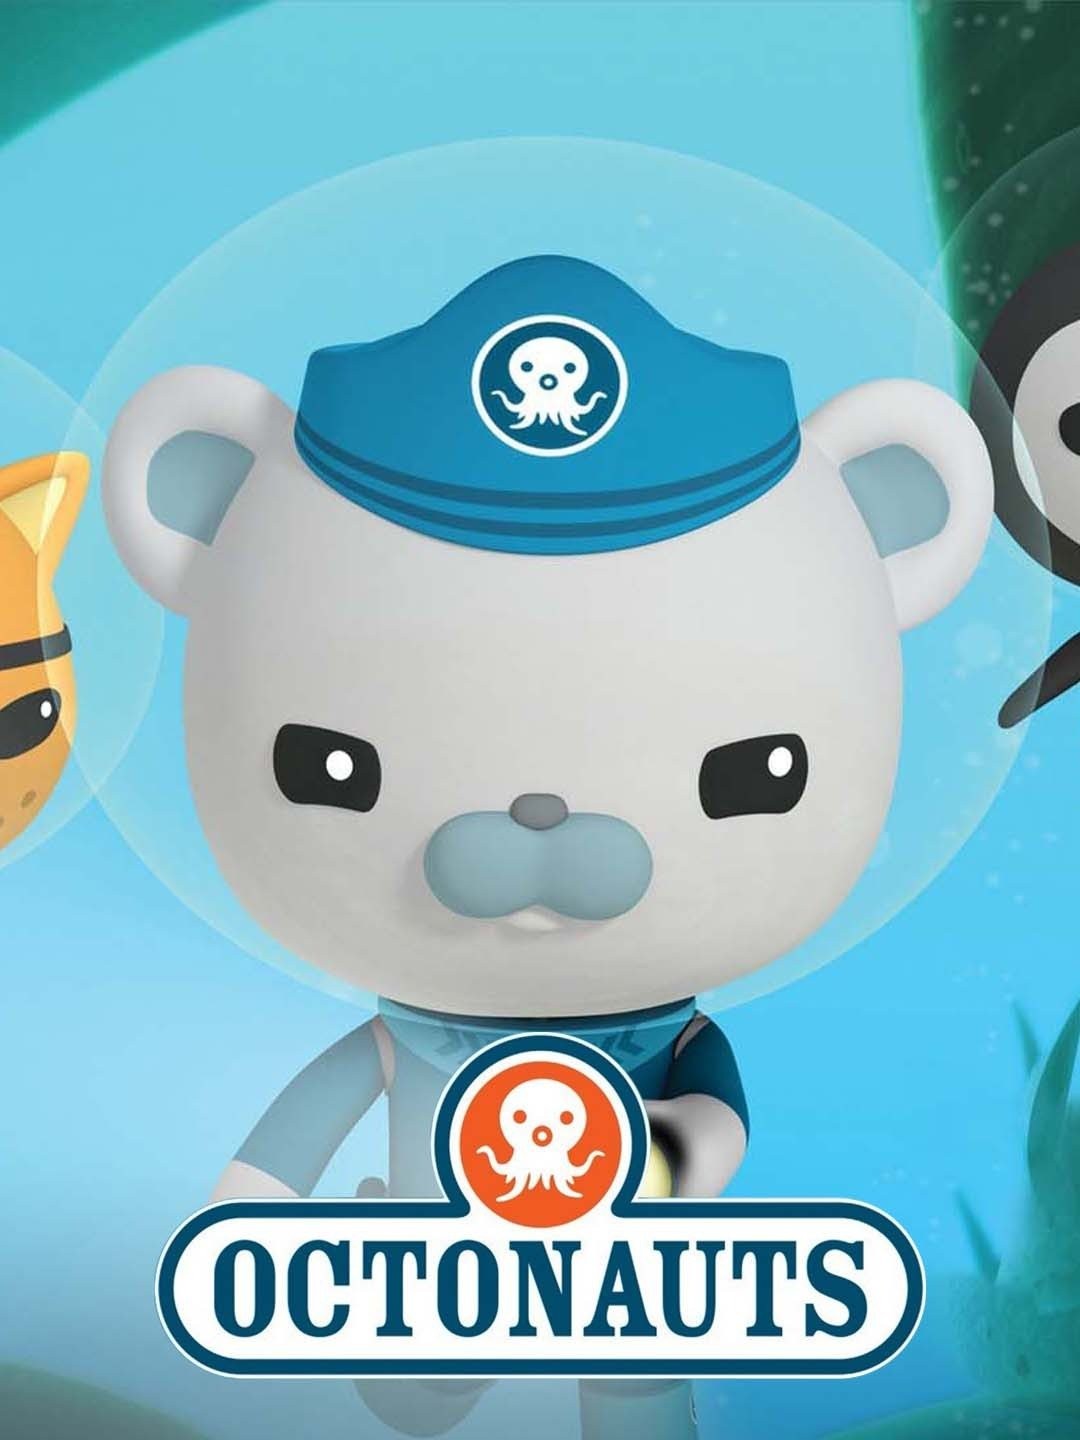 Best Toddler Show On Netflix Is Clearly 'Octonauts